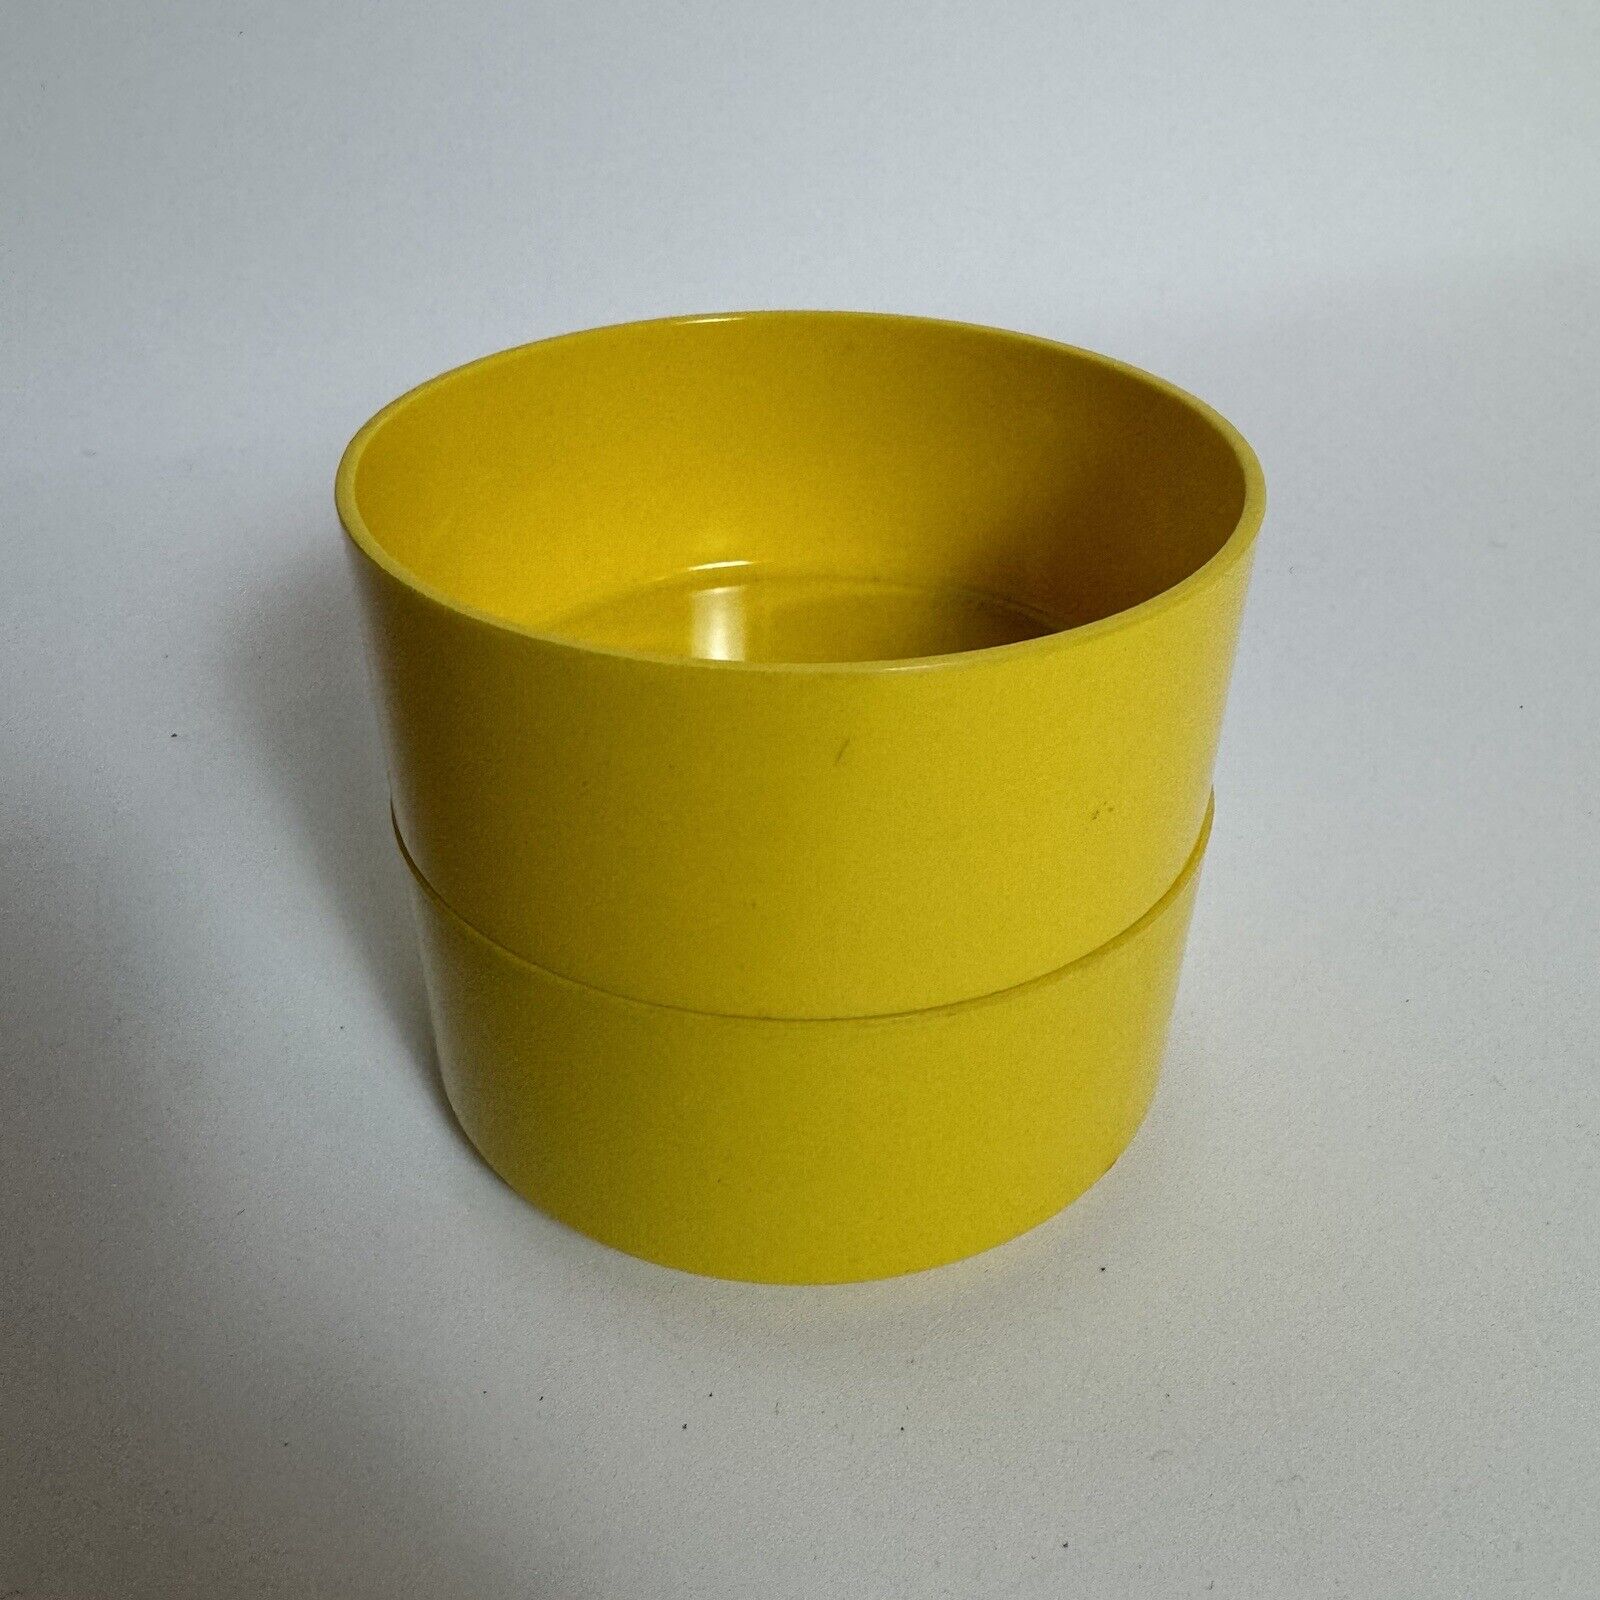 Set of Two (2) Vintage Heller Yellow Melamine Stacking Bowls Mid Century Modern